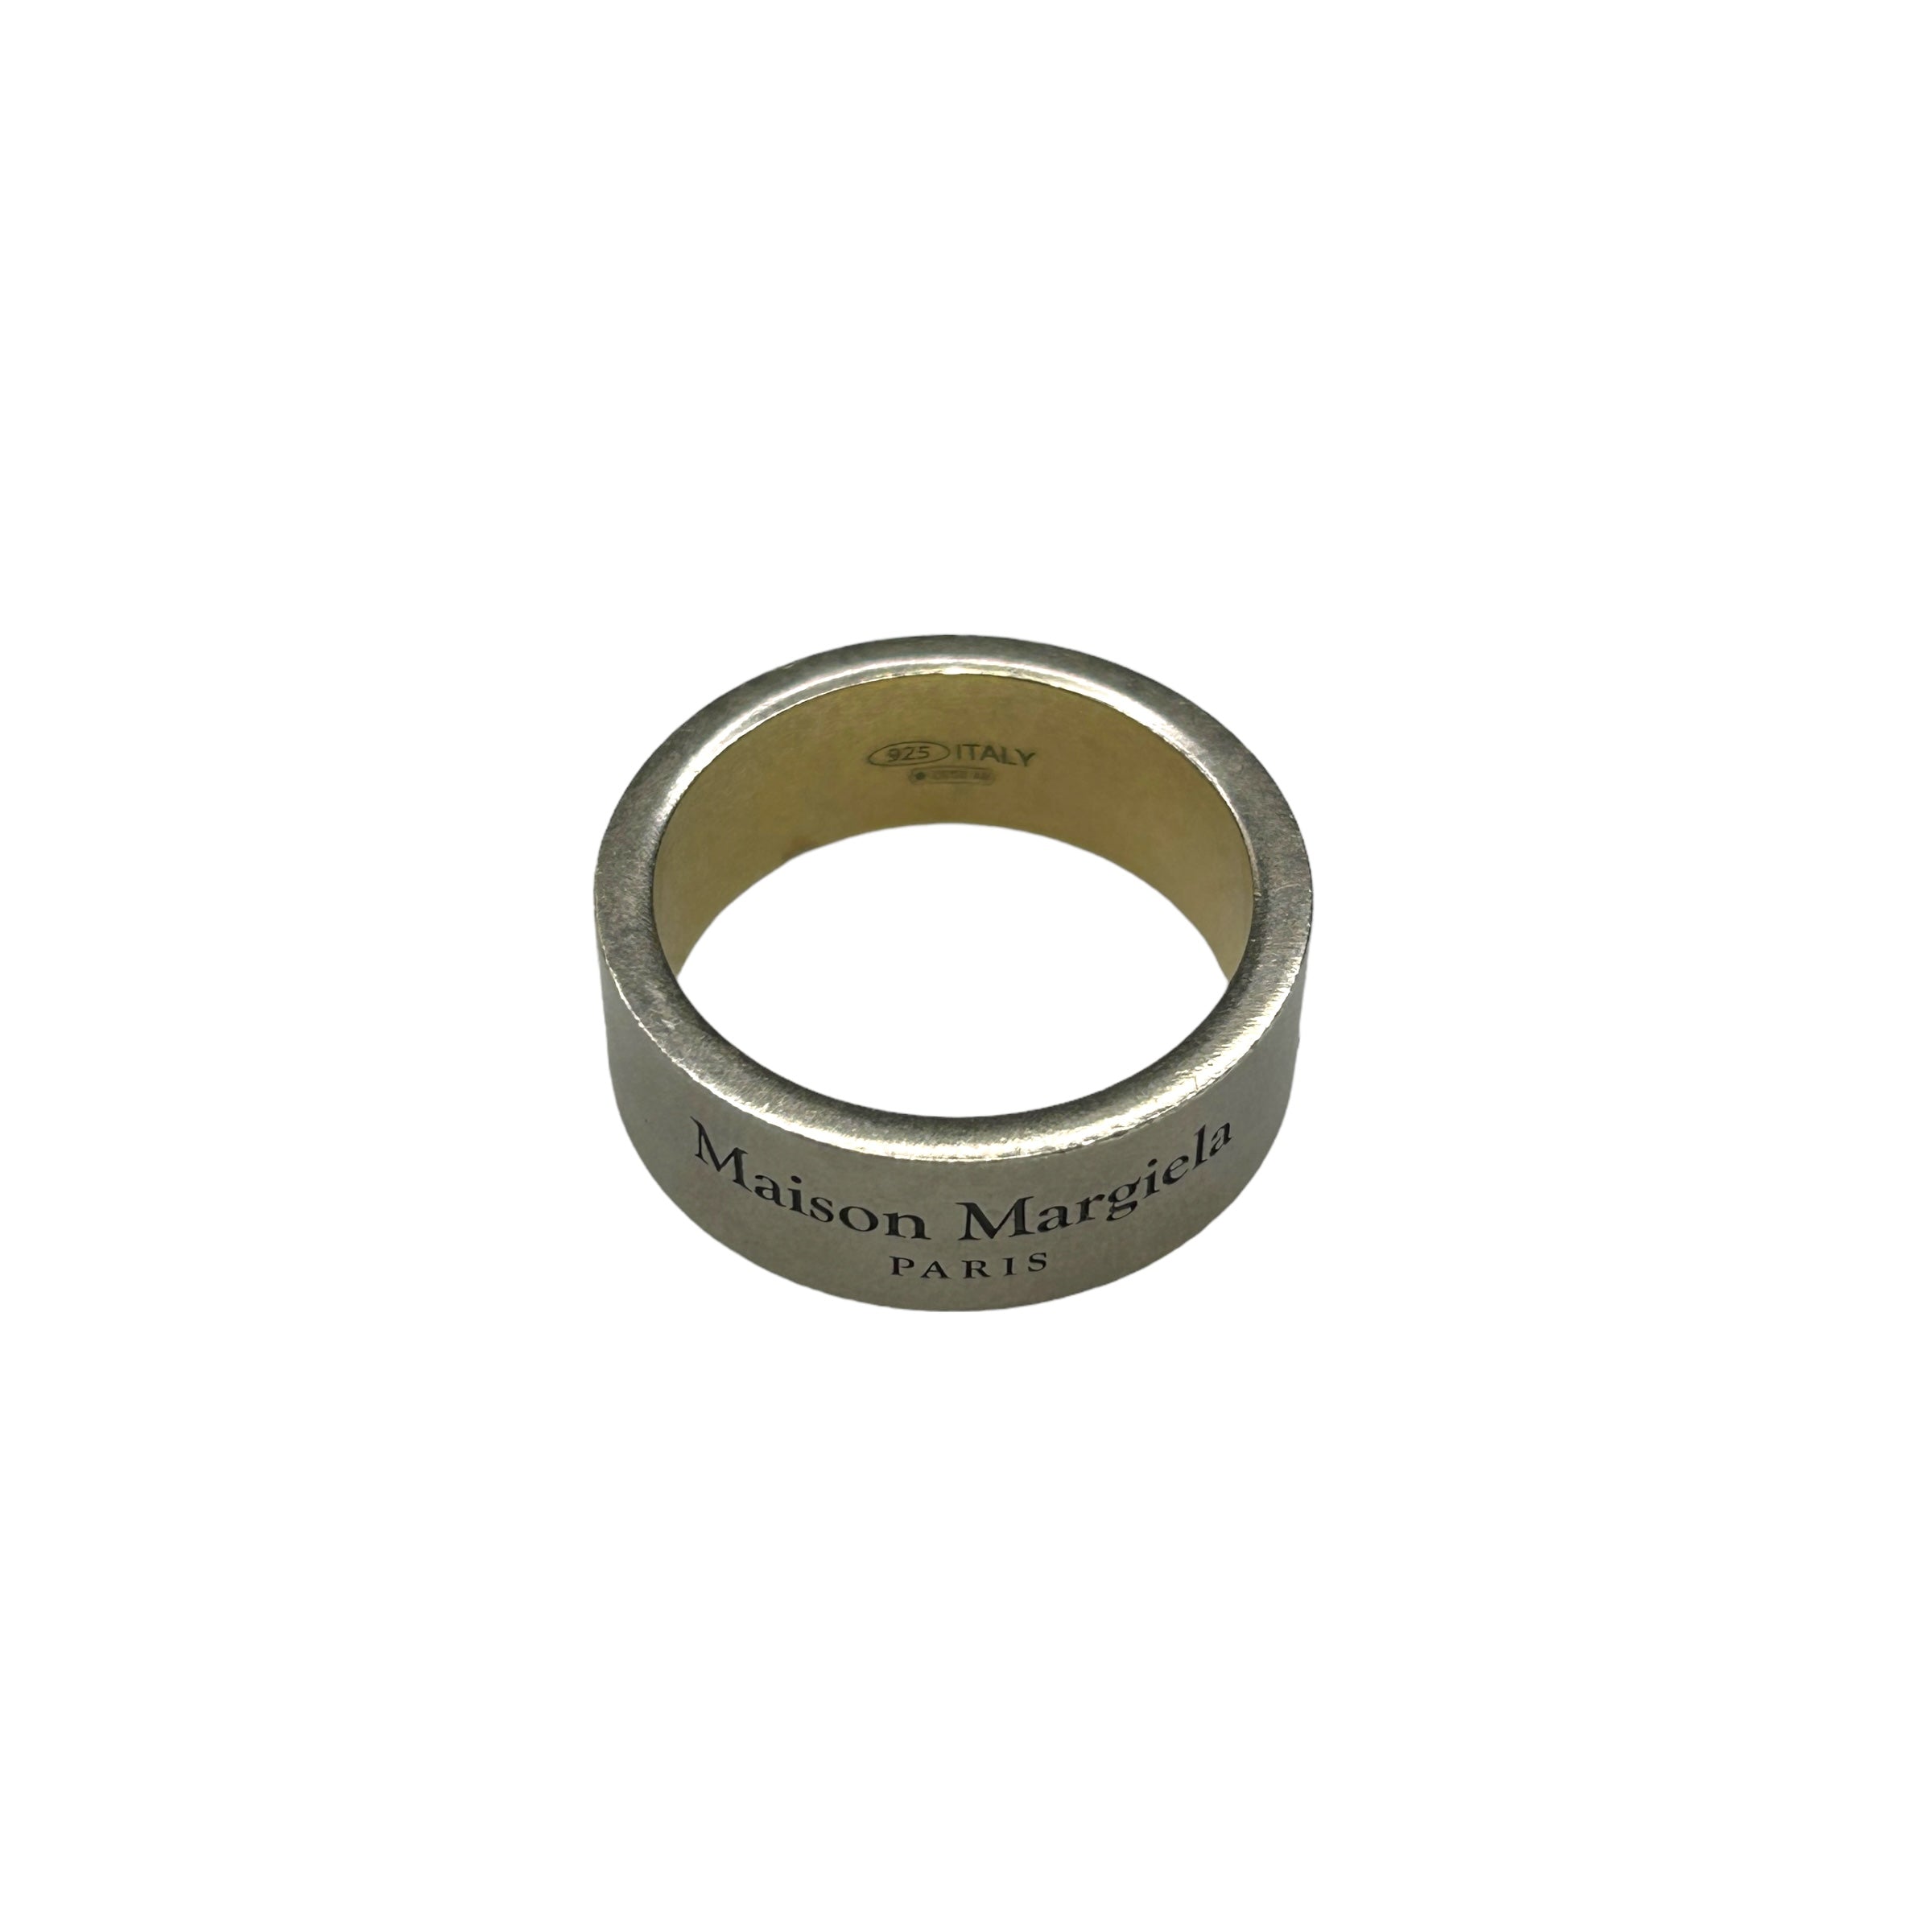 (10) MAISON MARGIELA ETCHED LOGO RING - 925 STERLING SILVER